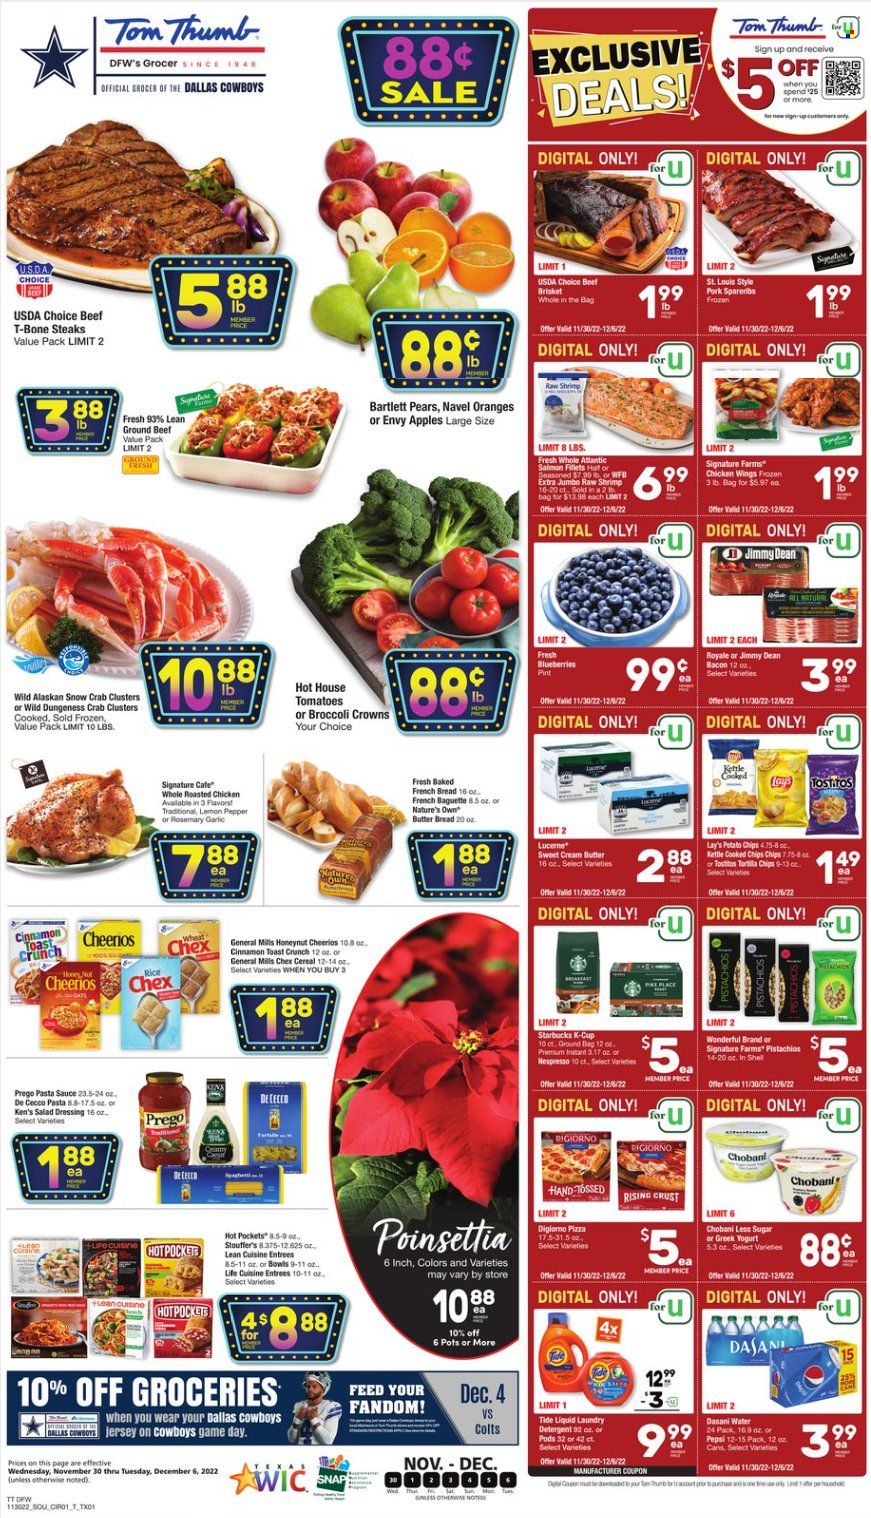 thumbnail - Tom Thumb Flyer - 11/30/2022 - 12/06/2022 - Sales products - baguette, bread, french bread, garlic, apples, Bartlett pears, blueberries, pears, oranges, salmon, salmon fillet, crab, shrimps, spaghetti, hot pocket, pizza, chicken roast, pasta sauce, sauce, Lean Cuisine, Jimmy Dean, bacon, greek yoghurt, yoghurt, Chobani, chicken wings, Stouffer's, tortilla chips, potato chips, Lay’s, Tostitos, cereals, Cheerios, rice, rosemary, cinnamon, salad dressing, dressing, pistachios, Pepsi, Starbucks, Nespresso, coffee capsules, K-Cups, beef meat, ground beef, t-bone steak, steak, beef brisket, pork spare ribs, detergent, Tide, laundry detergent, navel oranges. Page 1.